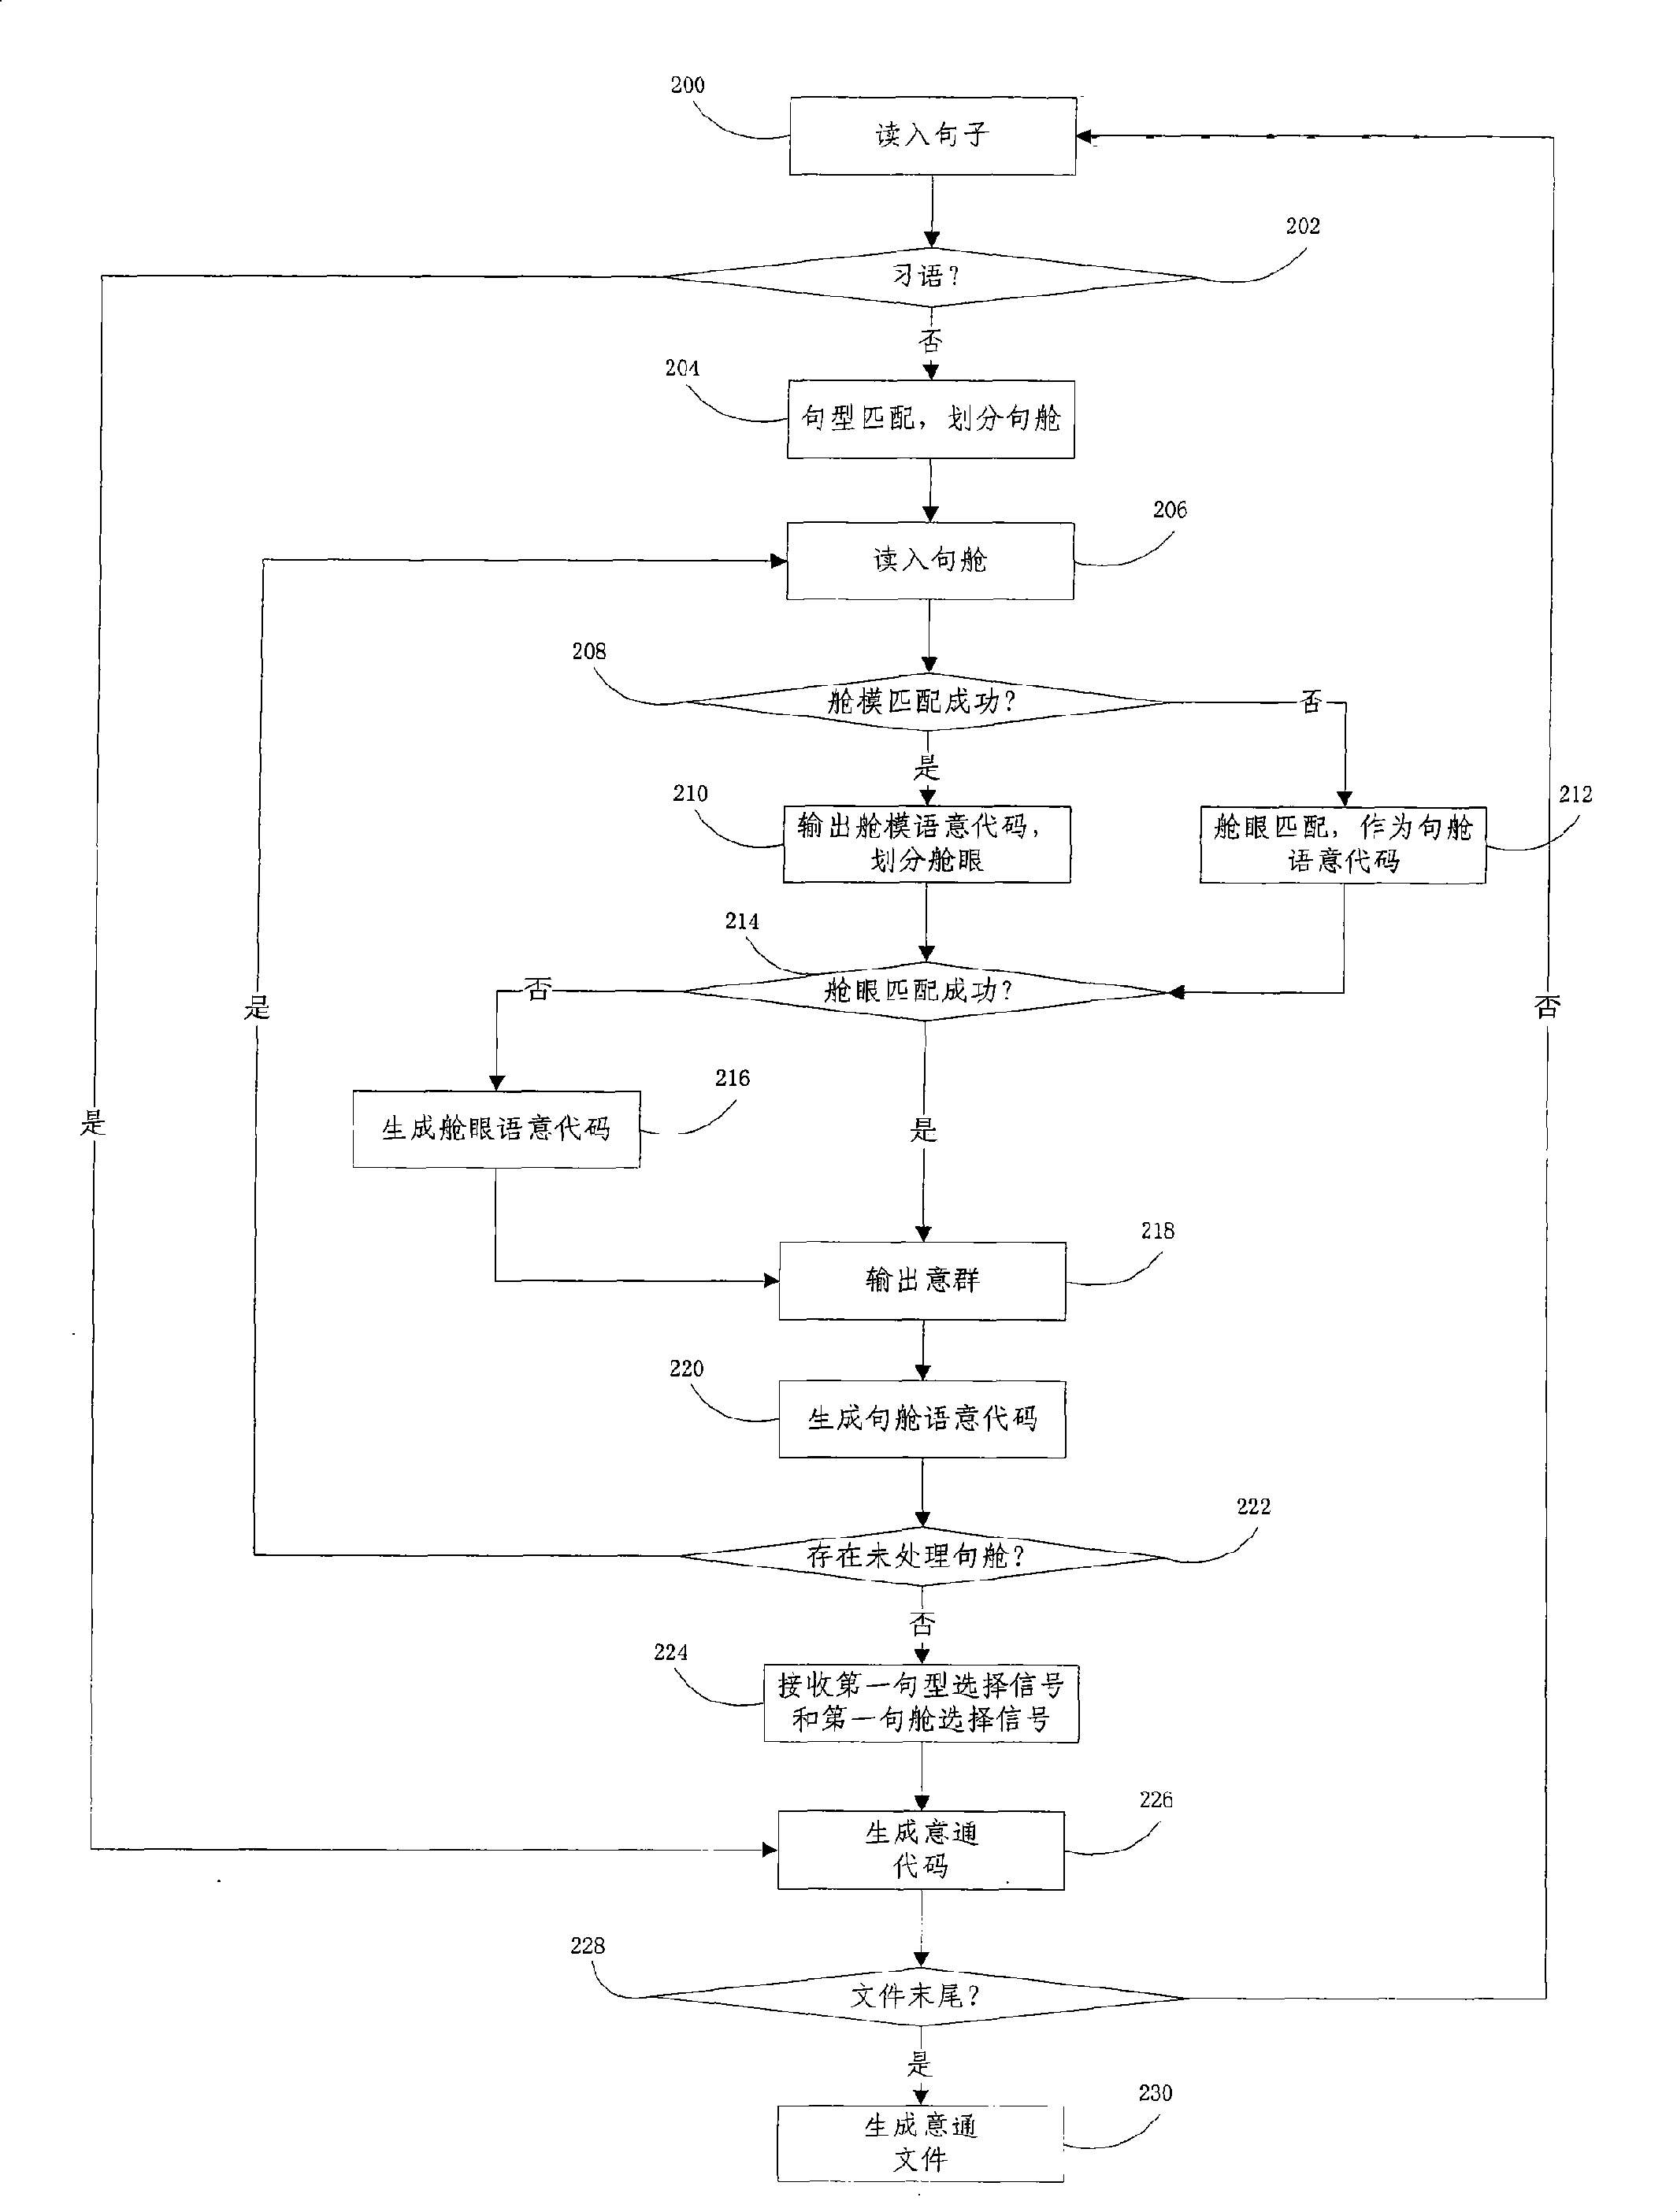 Method and apparatus for converting text